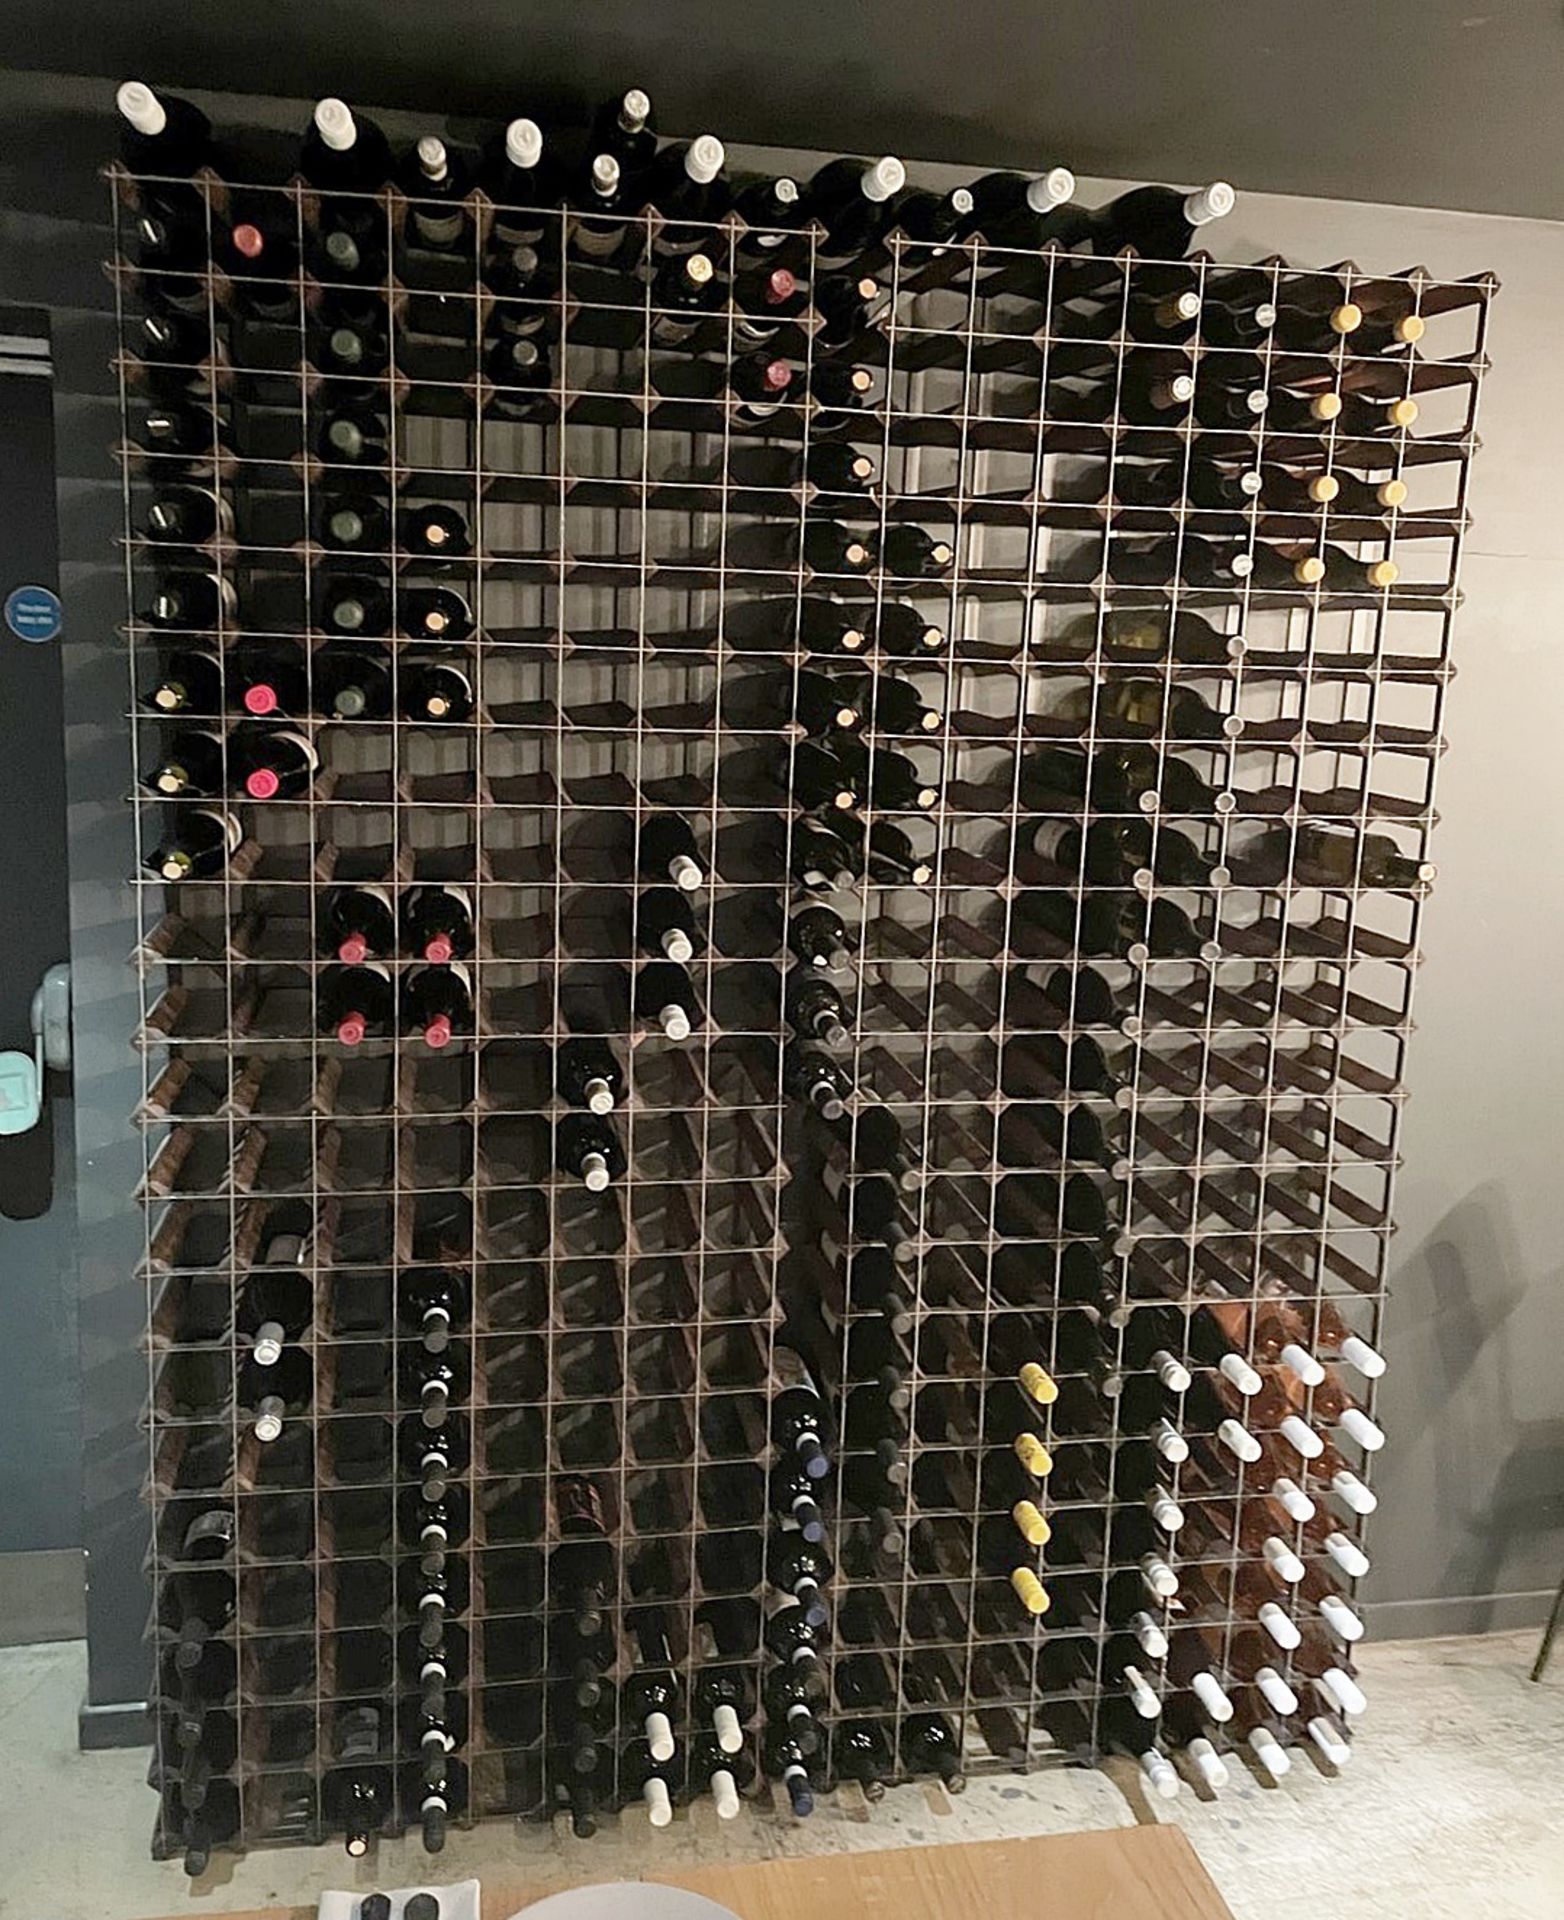 1 x Large Bank Of Wine Racking - With A Capacity Of Up To 374 x Bottles - Dimensions: H206 x 165 x